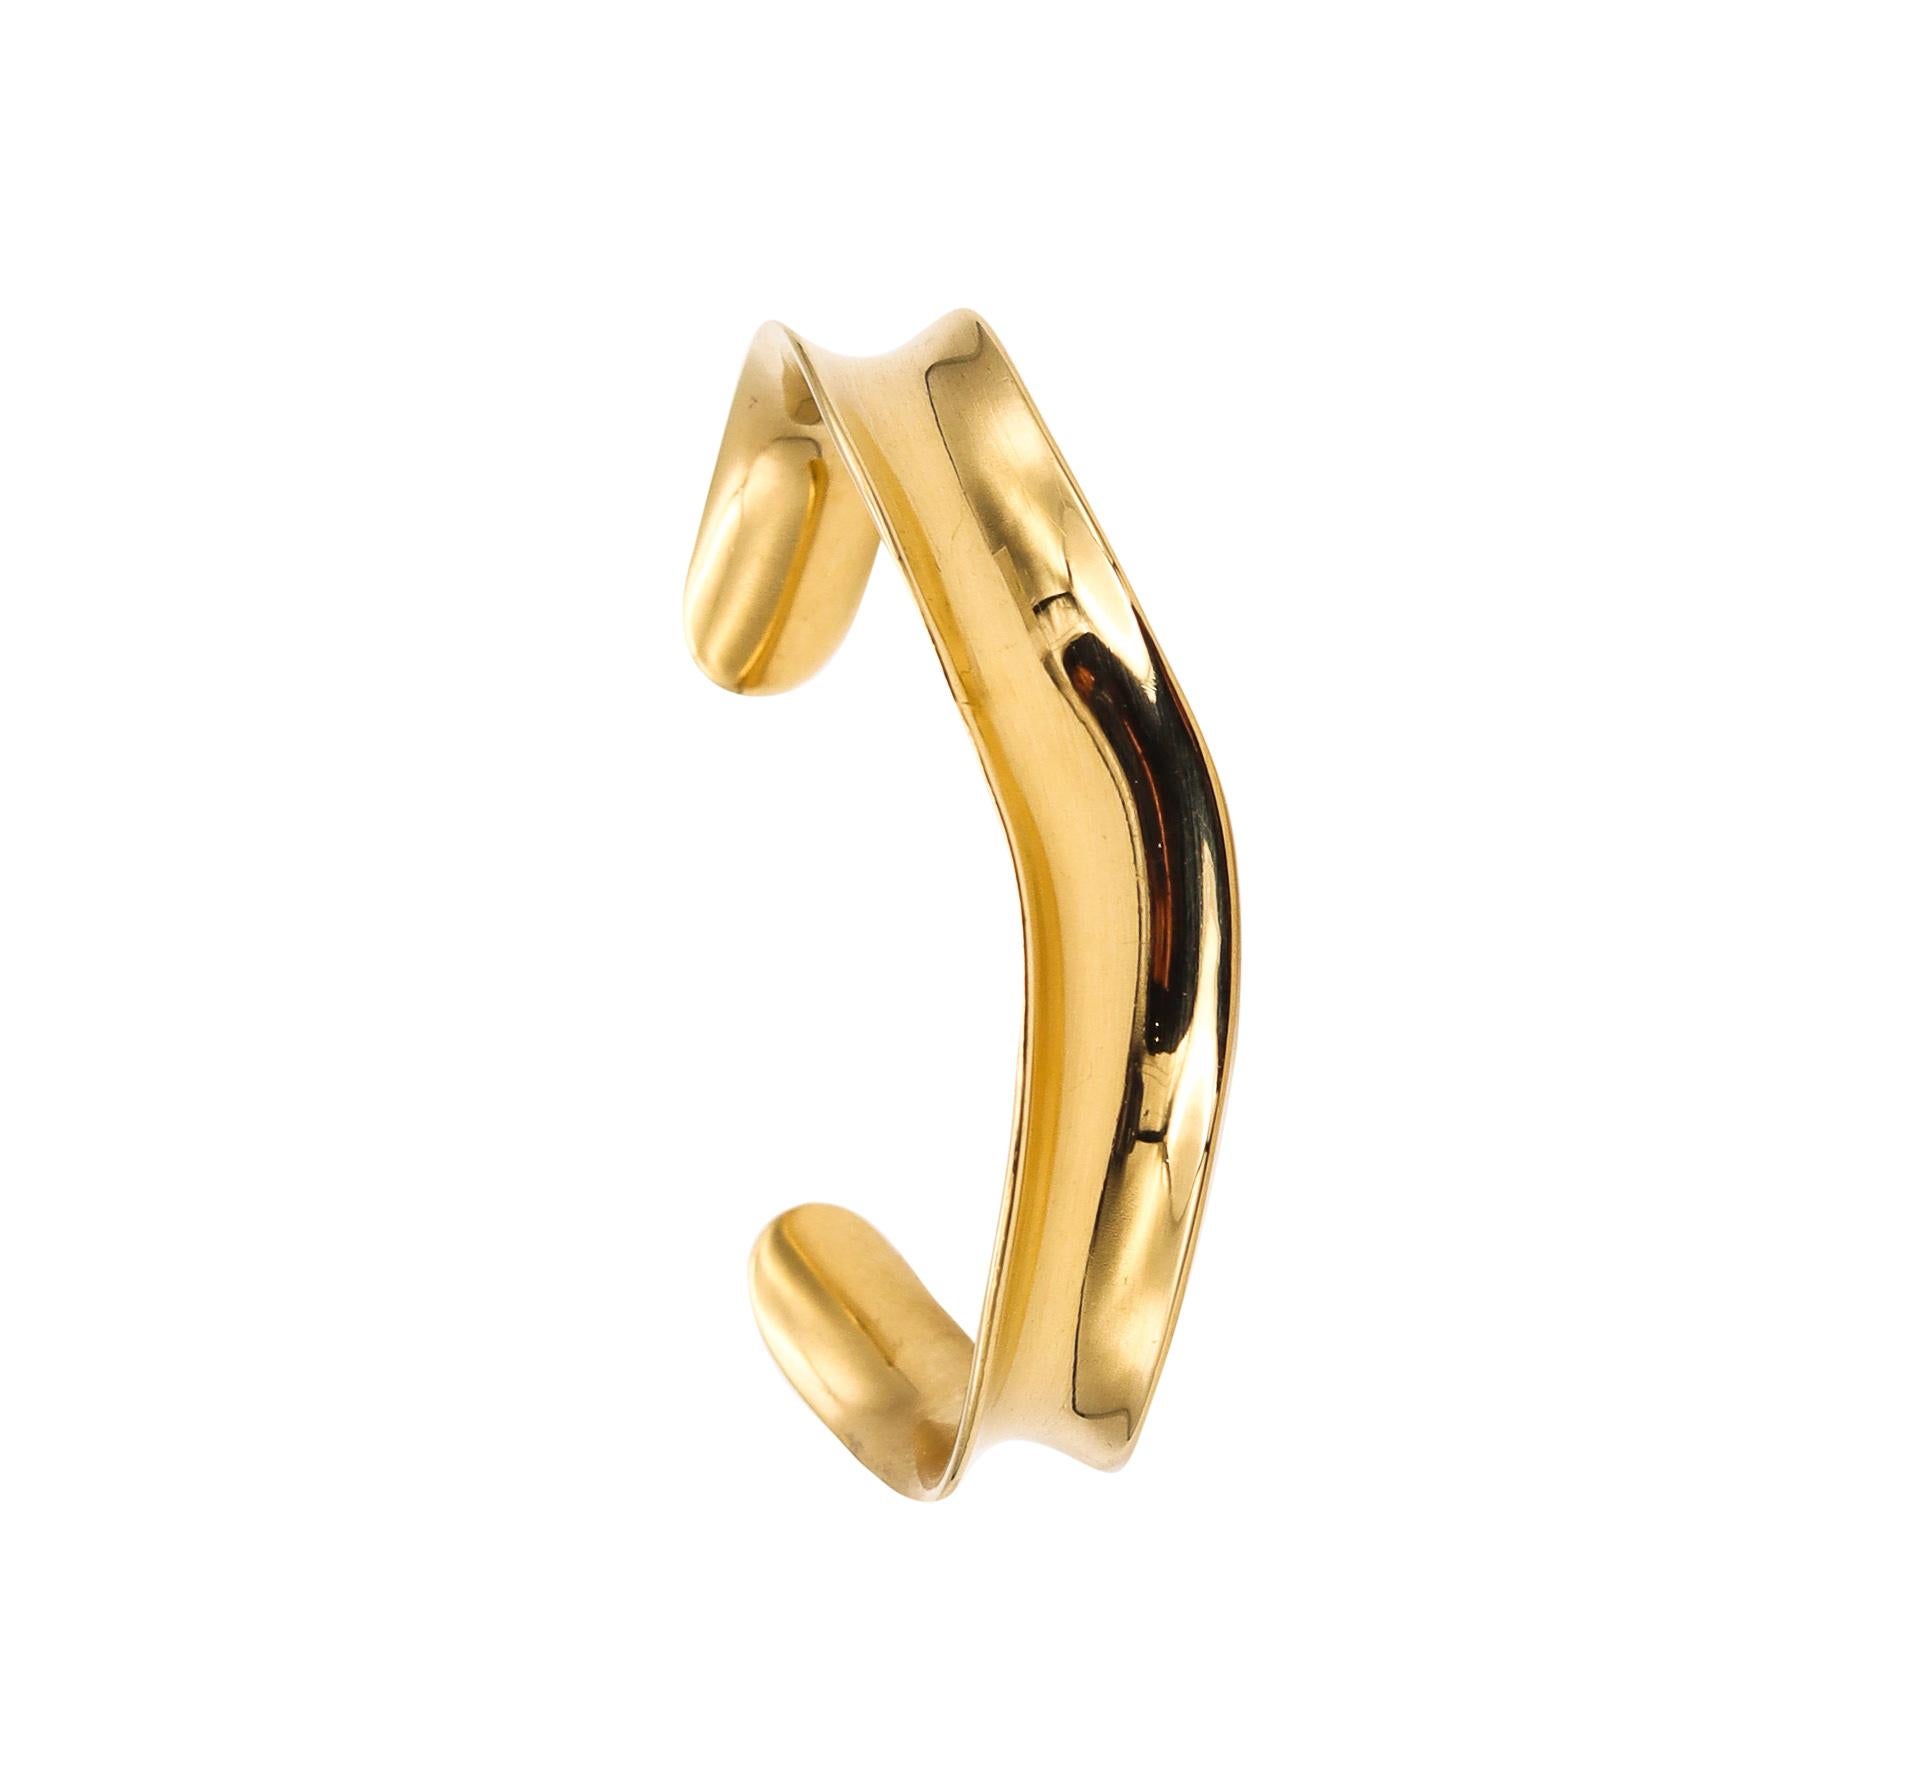 Tiffany & Co 1980 Angela Cummings Wave Cuff Bracelet In Solid 18Kt Yellow Gold For Sale 3